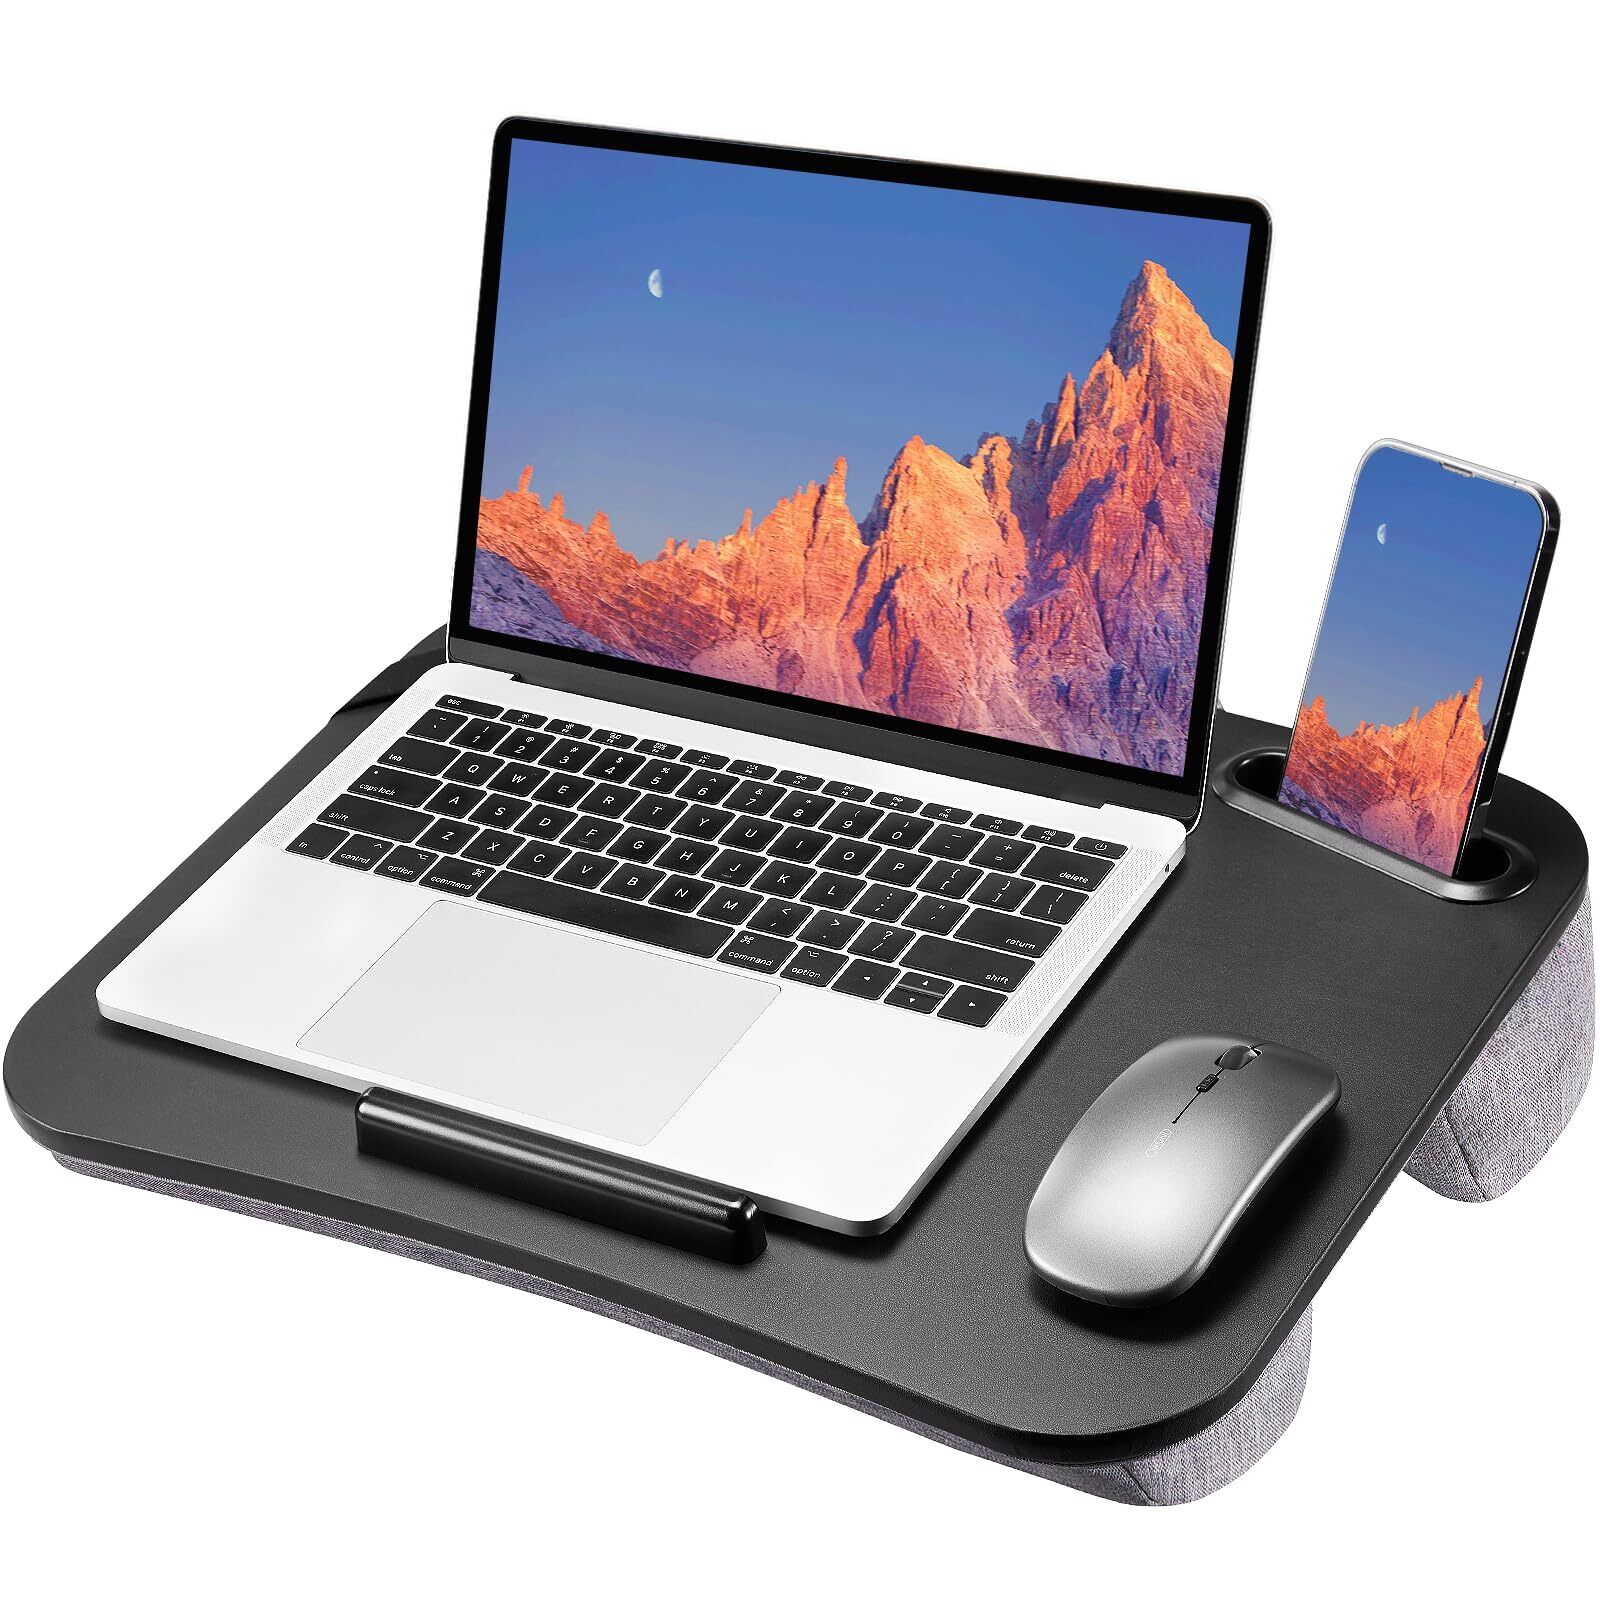 HUANUO Laptop Lap Desk Fits up to 15.6 inch Laptops Lap Desk with Cushion Pho...